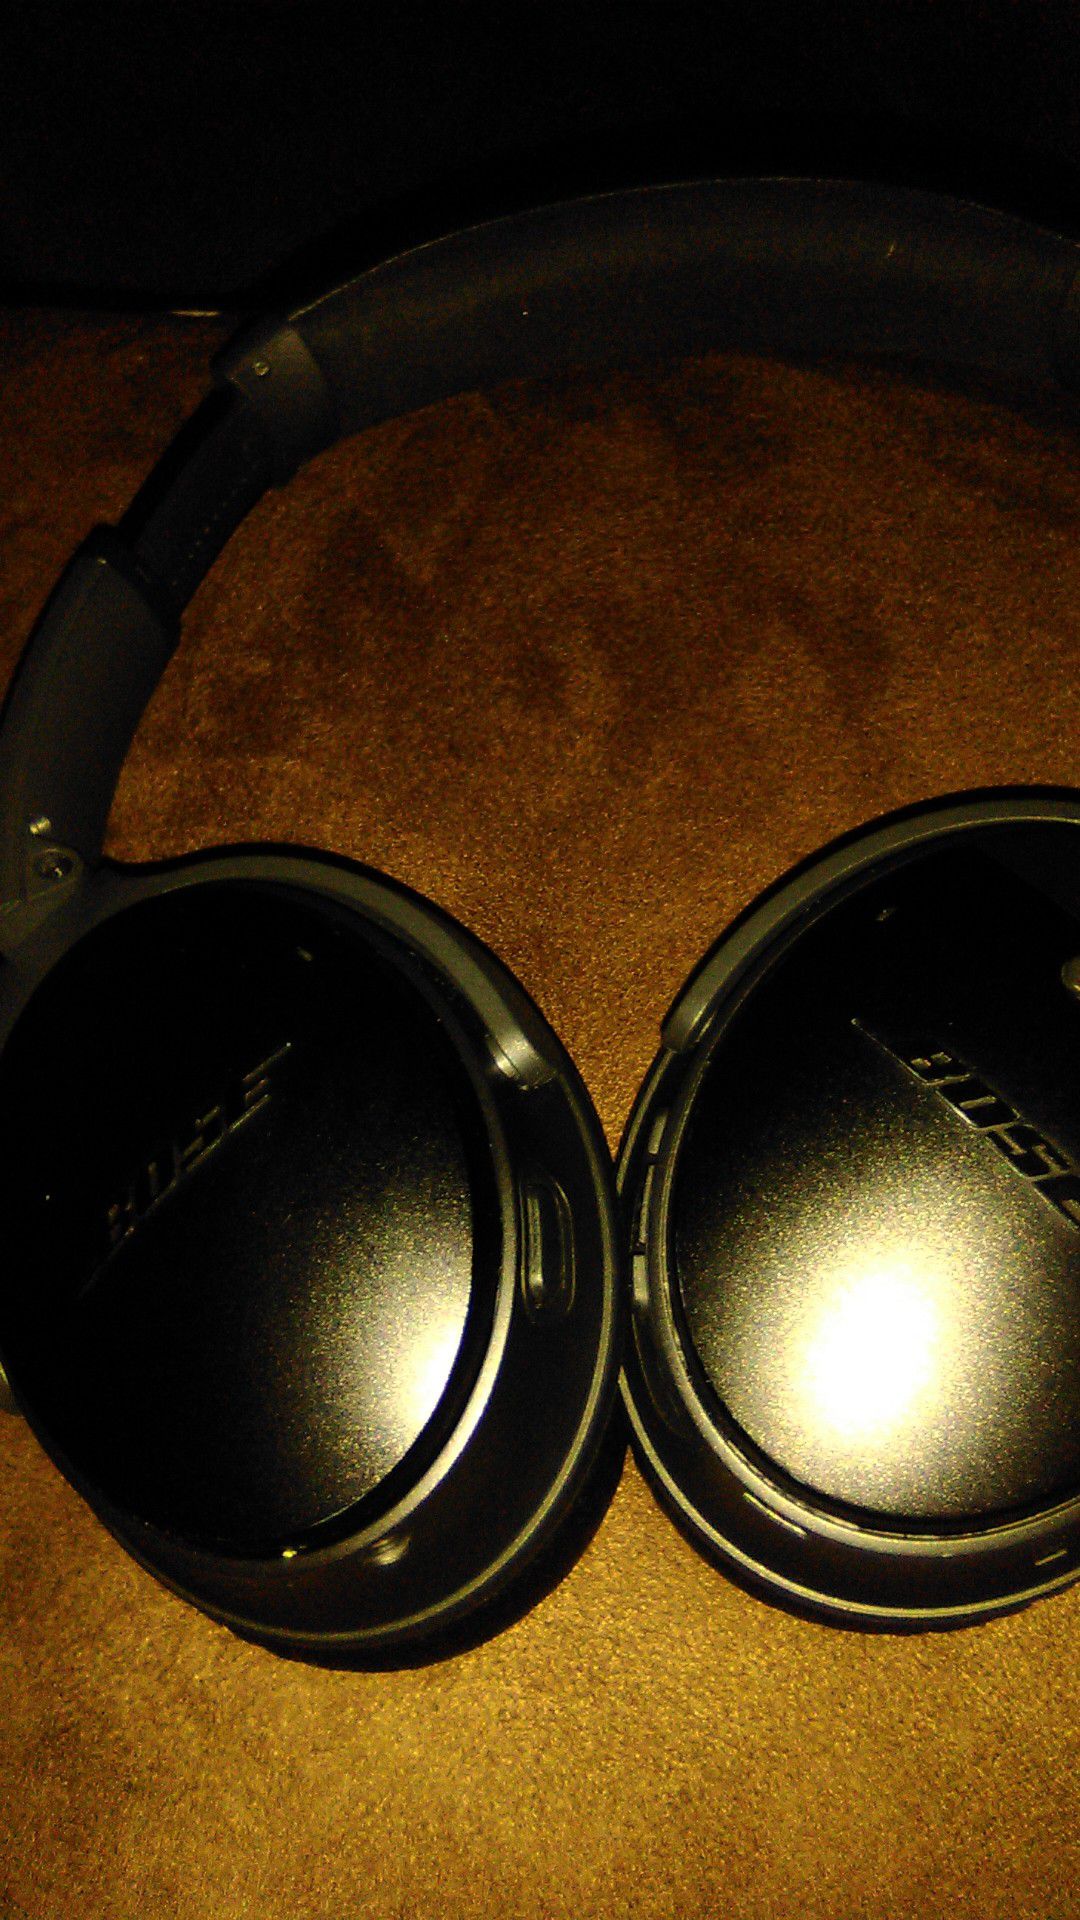 Bose noise cancellation blue tooth headphones